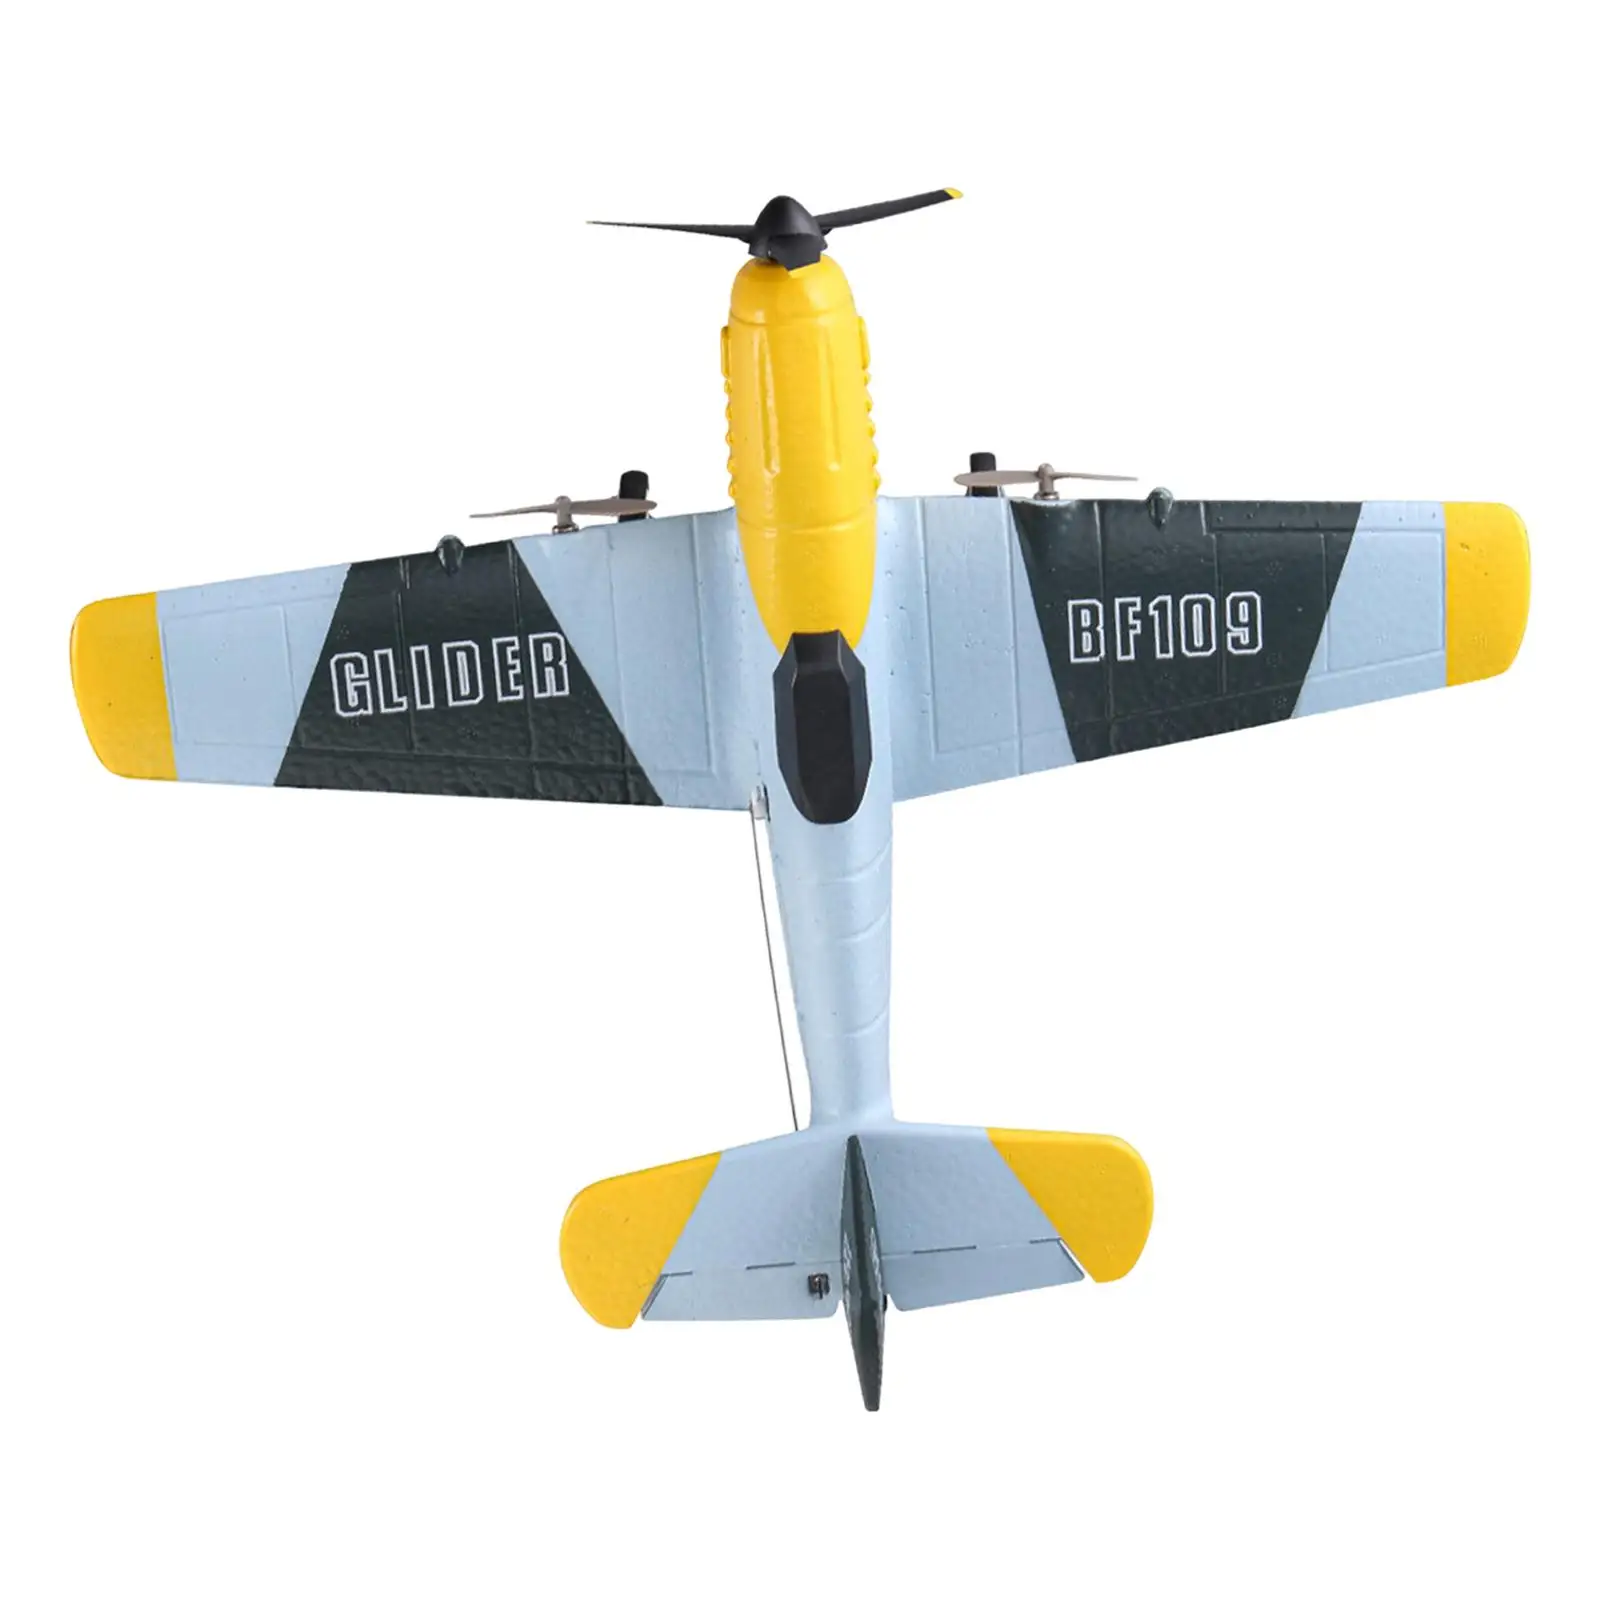 3 CH RC Easy to Control Lightweight Gift 2.4G RC Glider Remote Control Airplane for Boys Girls Beginner Adults Kids